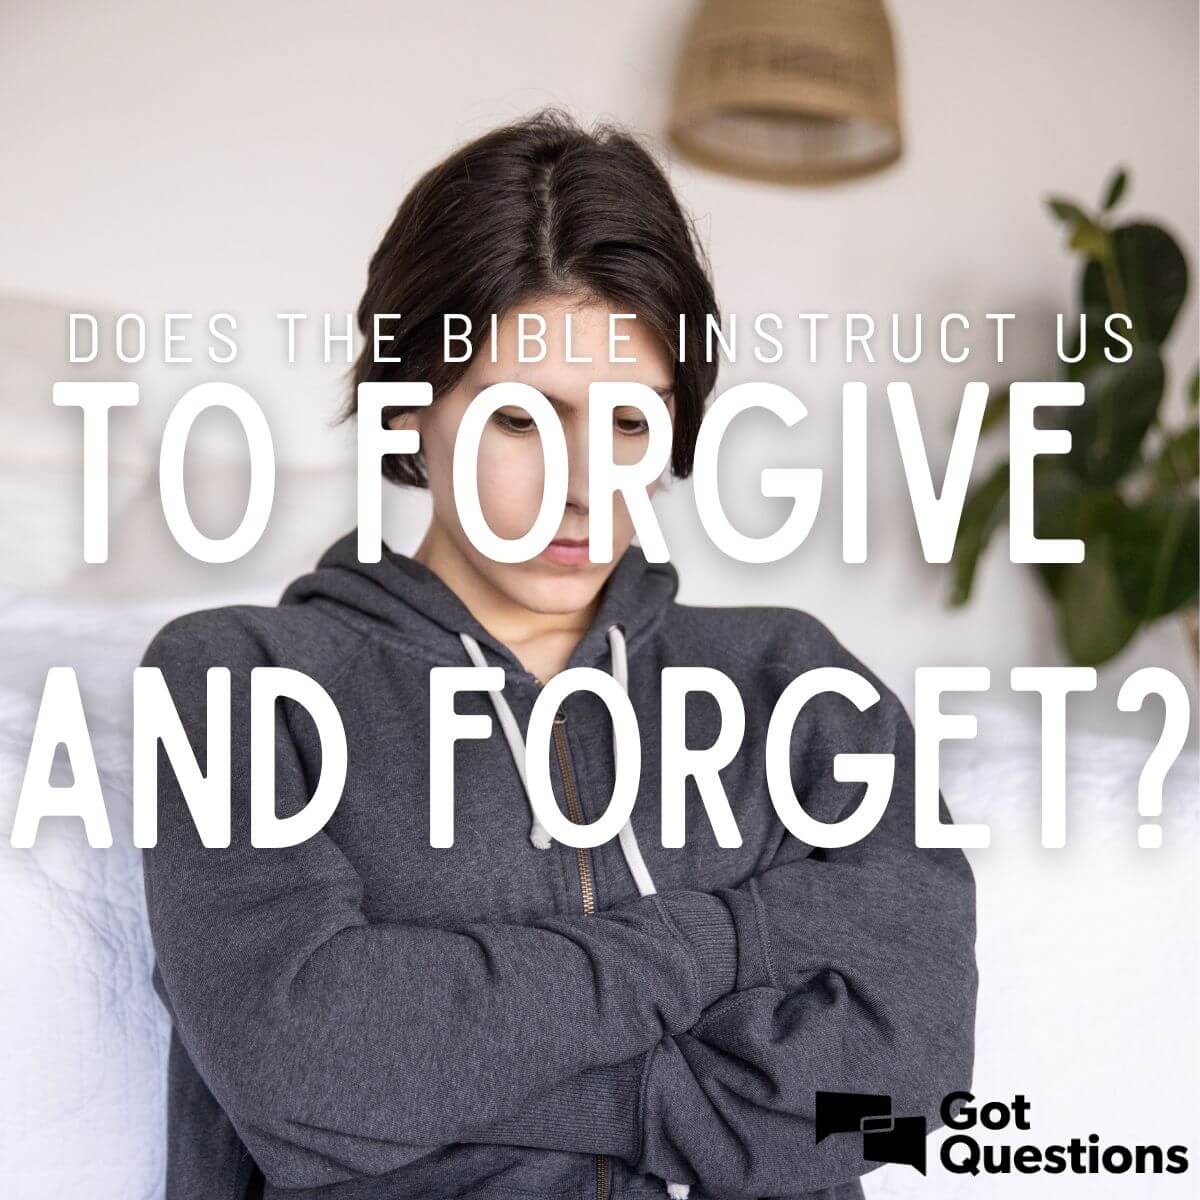 does-the-bible-instruct-us-to-forgive-and-forget-gotquestions